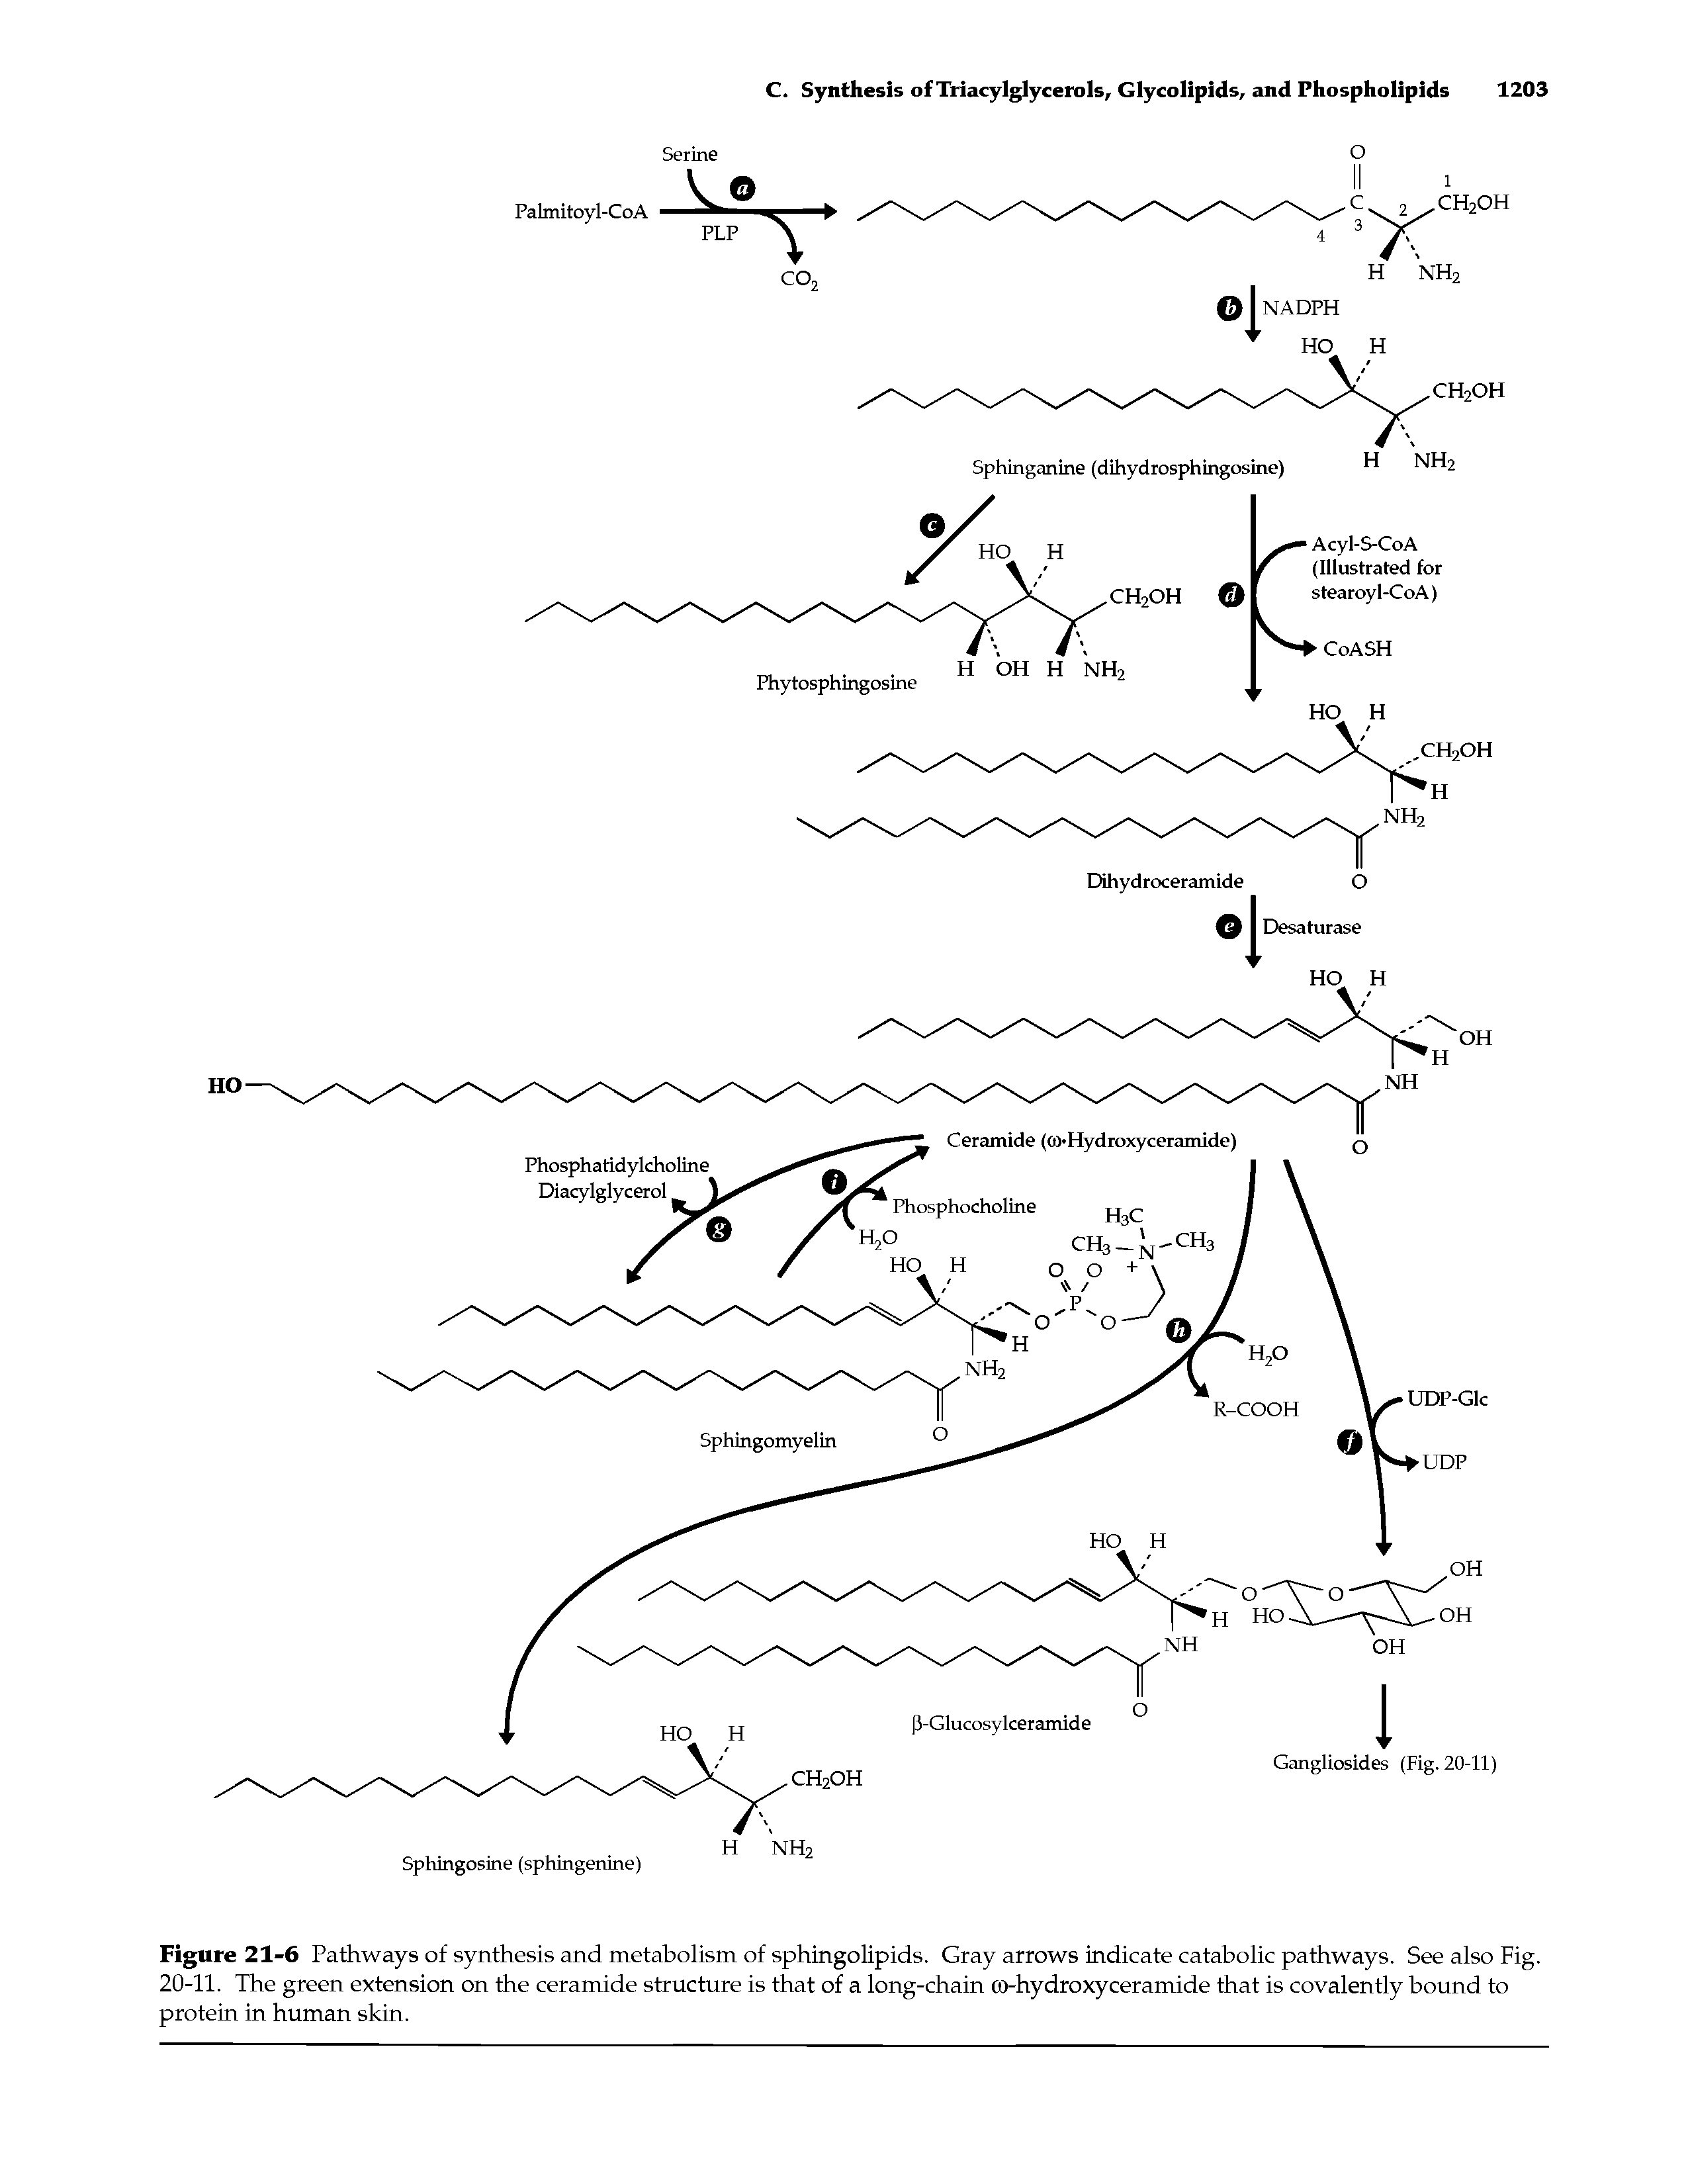 Figure 21-6 Pathways of synthesis and metabolism of sphingolipids. Gray arrows indicate catabolic pathways. See also Fig. 20-11. The green extension on the ceramide structure is that of a long-chain co-hydroxyceramide that is covalently bound to protein in human skin.